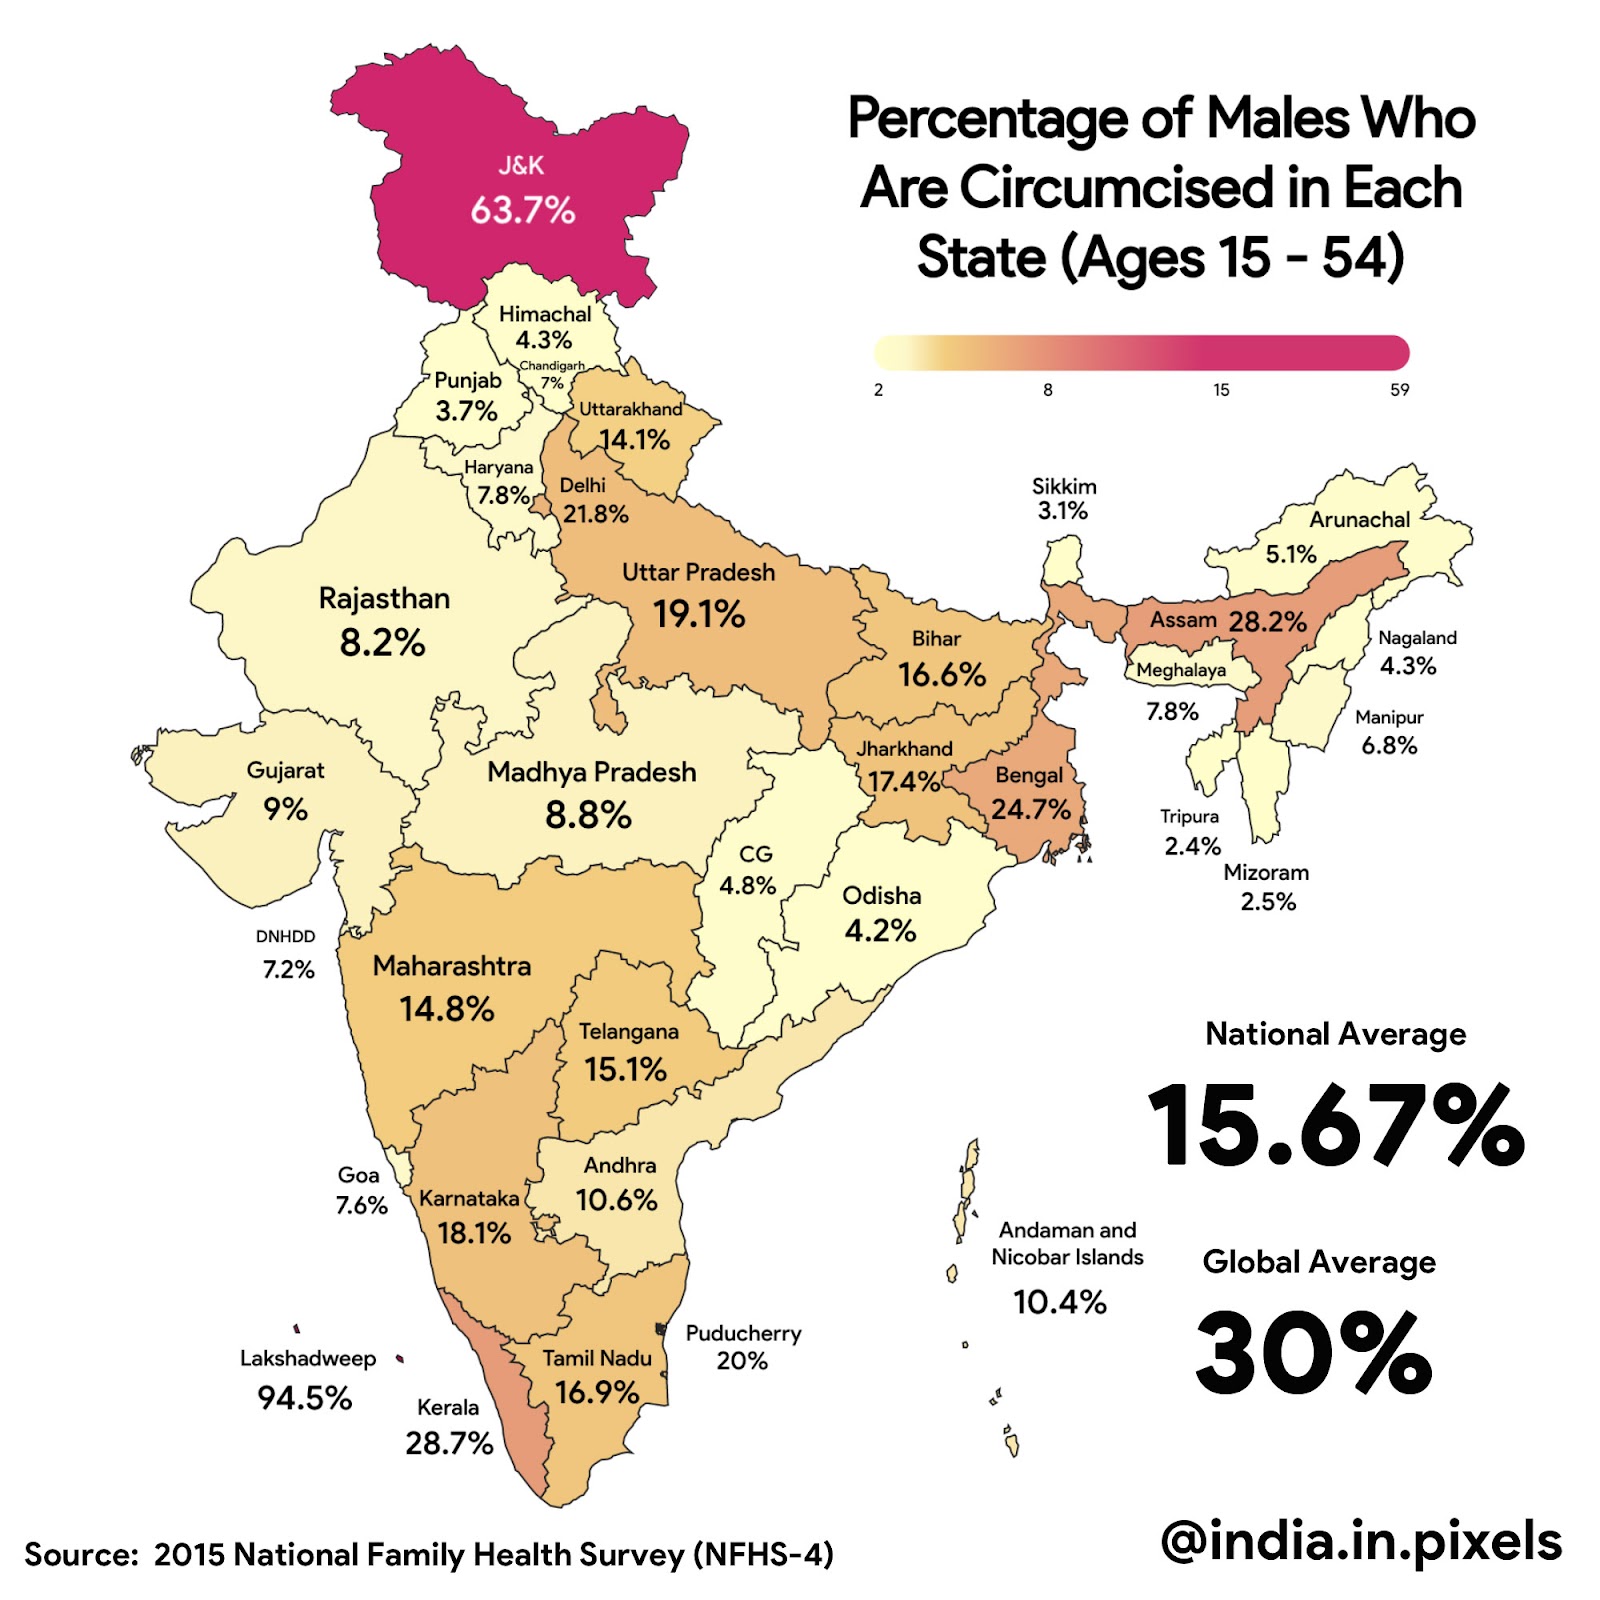 Percentage of Males who are Circumcised ( Ages 15 - 54 )